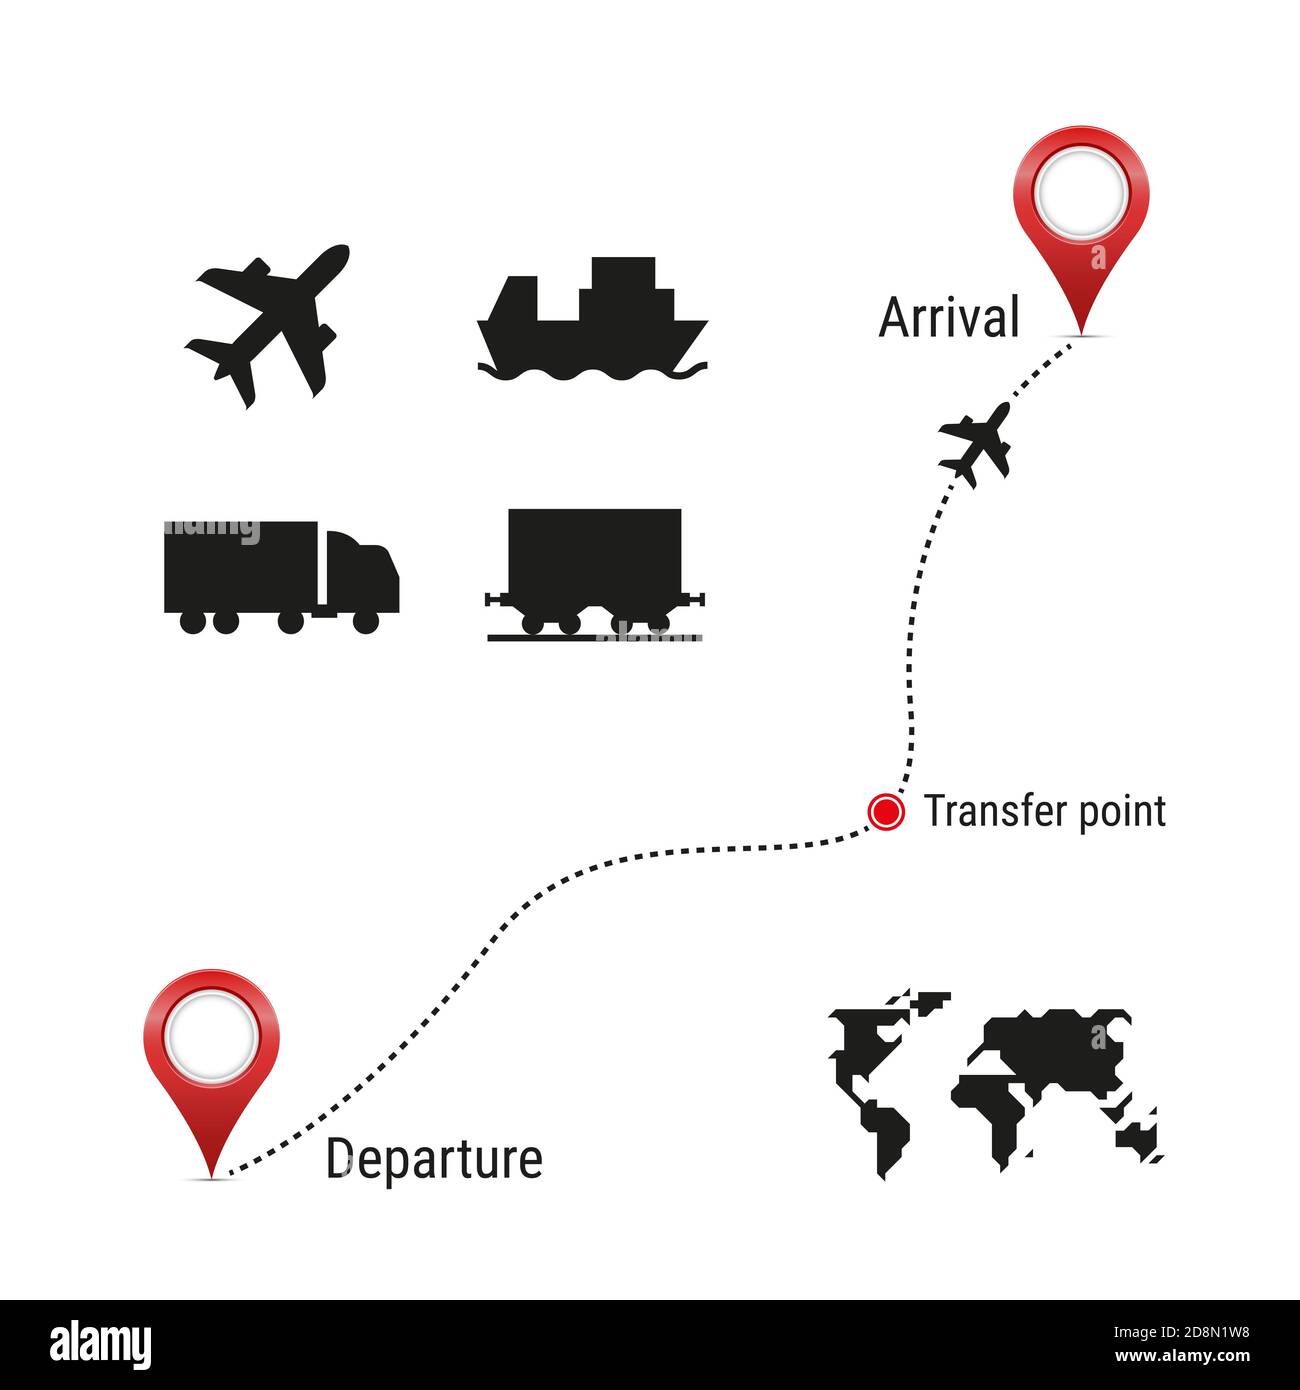 Cargo transportation icon set and route template. Simple world map. Airplane, container ship, wagon, railway car silhouette icons. illustration. Stock Photo